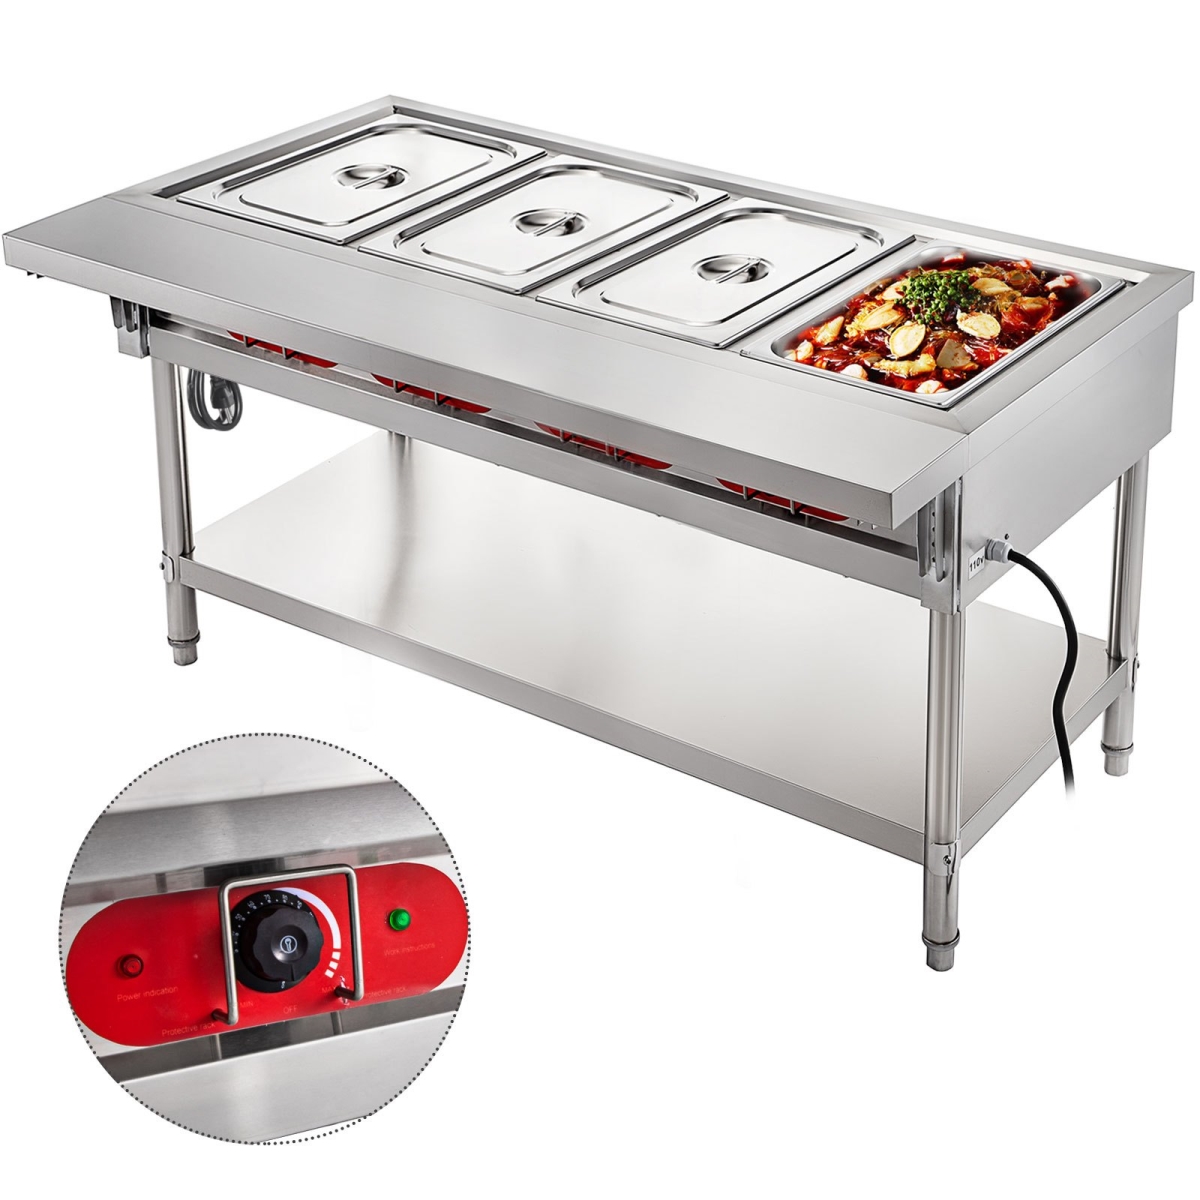 Picture of Vevor CJRT4G2000W000001V1 Steam Table Food Warmer 4 Pot Steam Table Food Warmer 18 qt. & Pan with Lids with 7 in. Cutting Board Commercial Electric Food Warmer